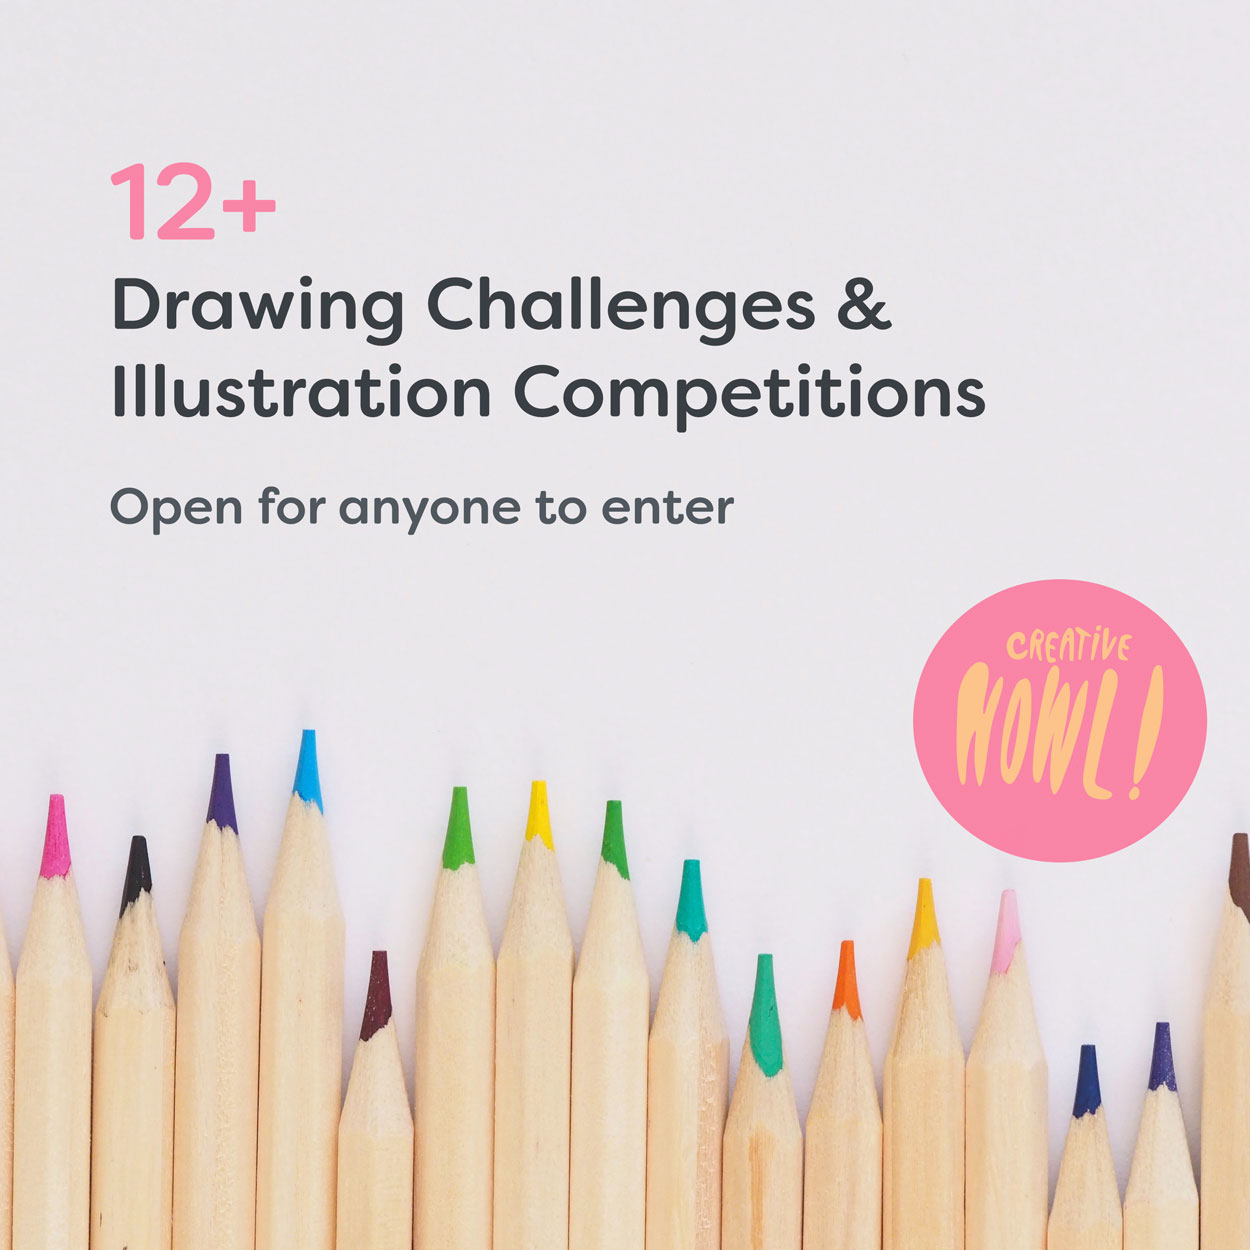 81 Drawing Challenges ideas  drawing challenge sketch book danny gregory